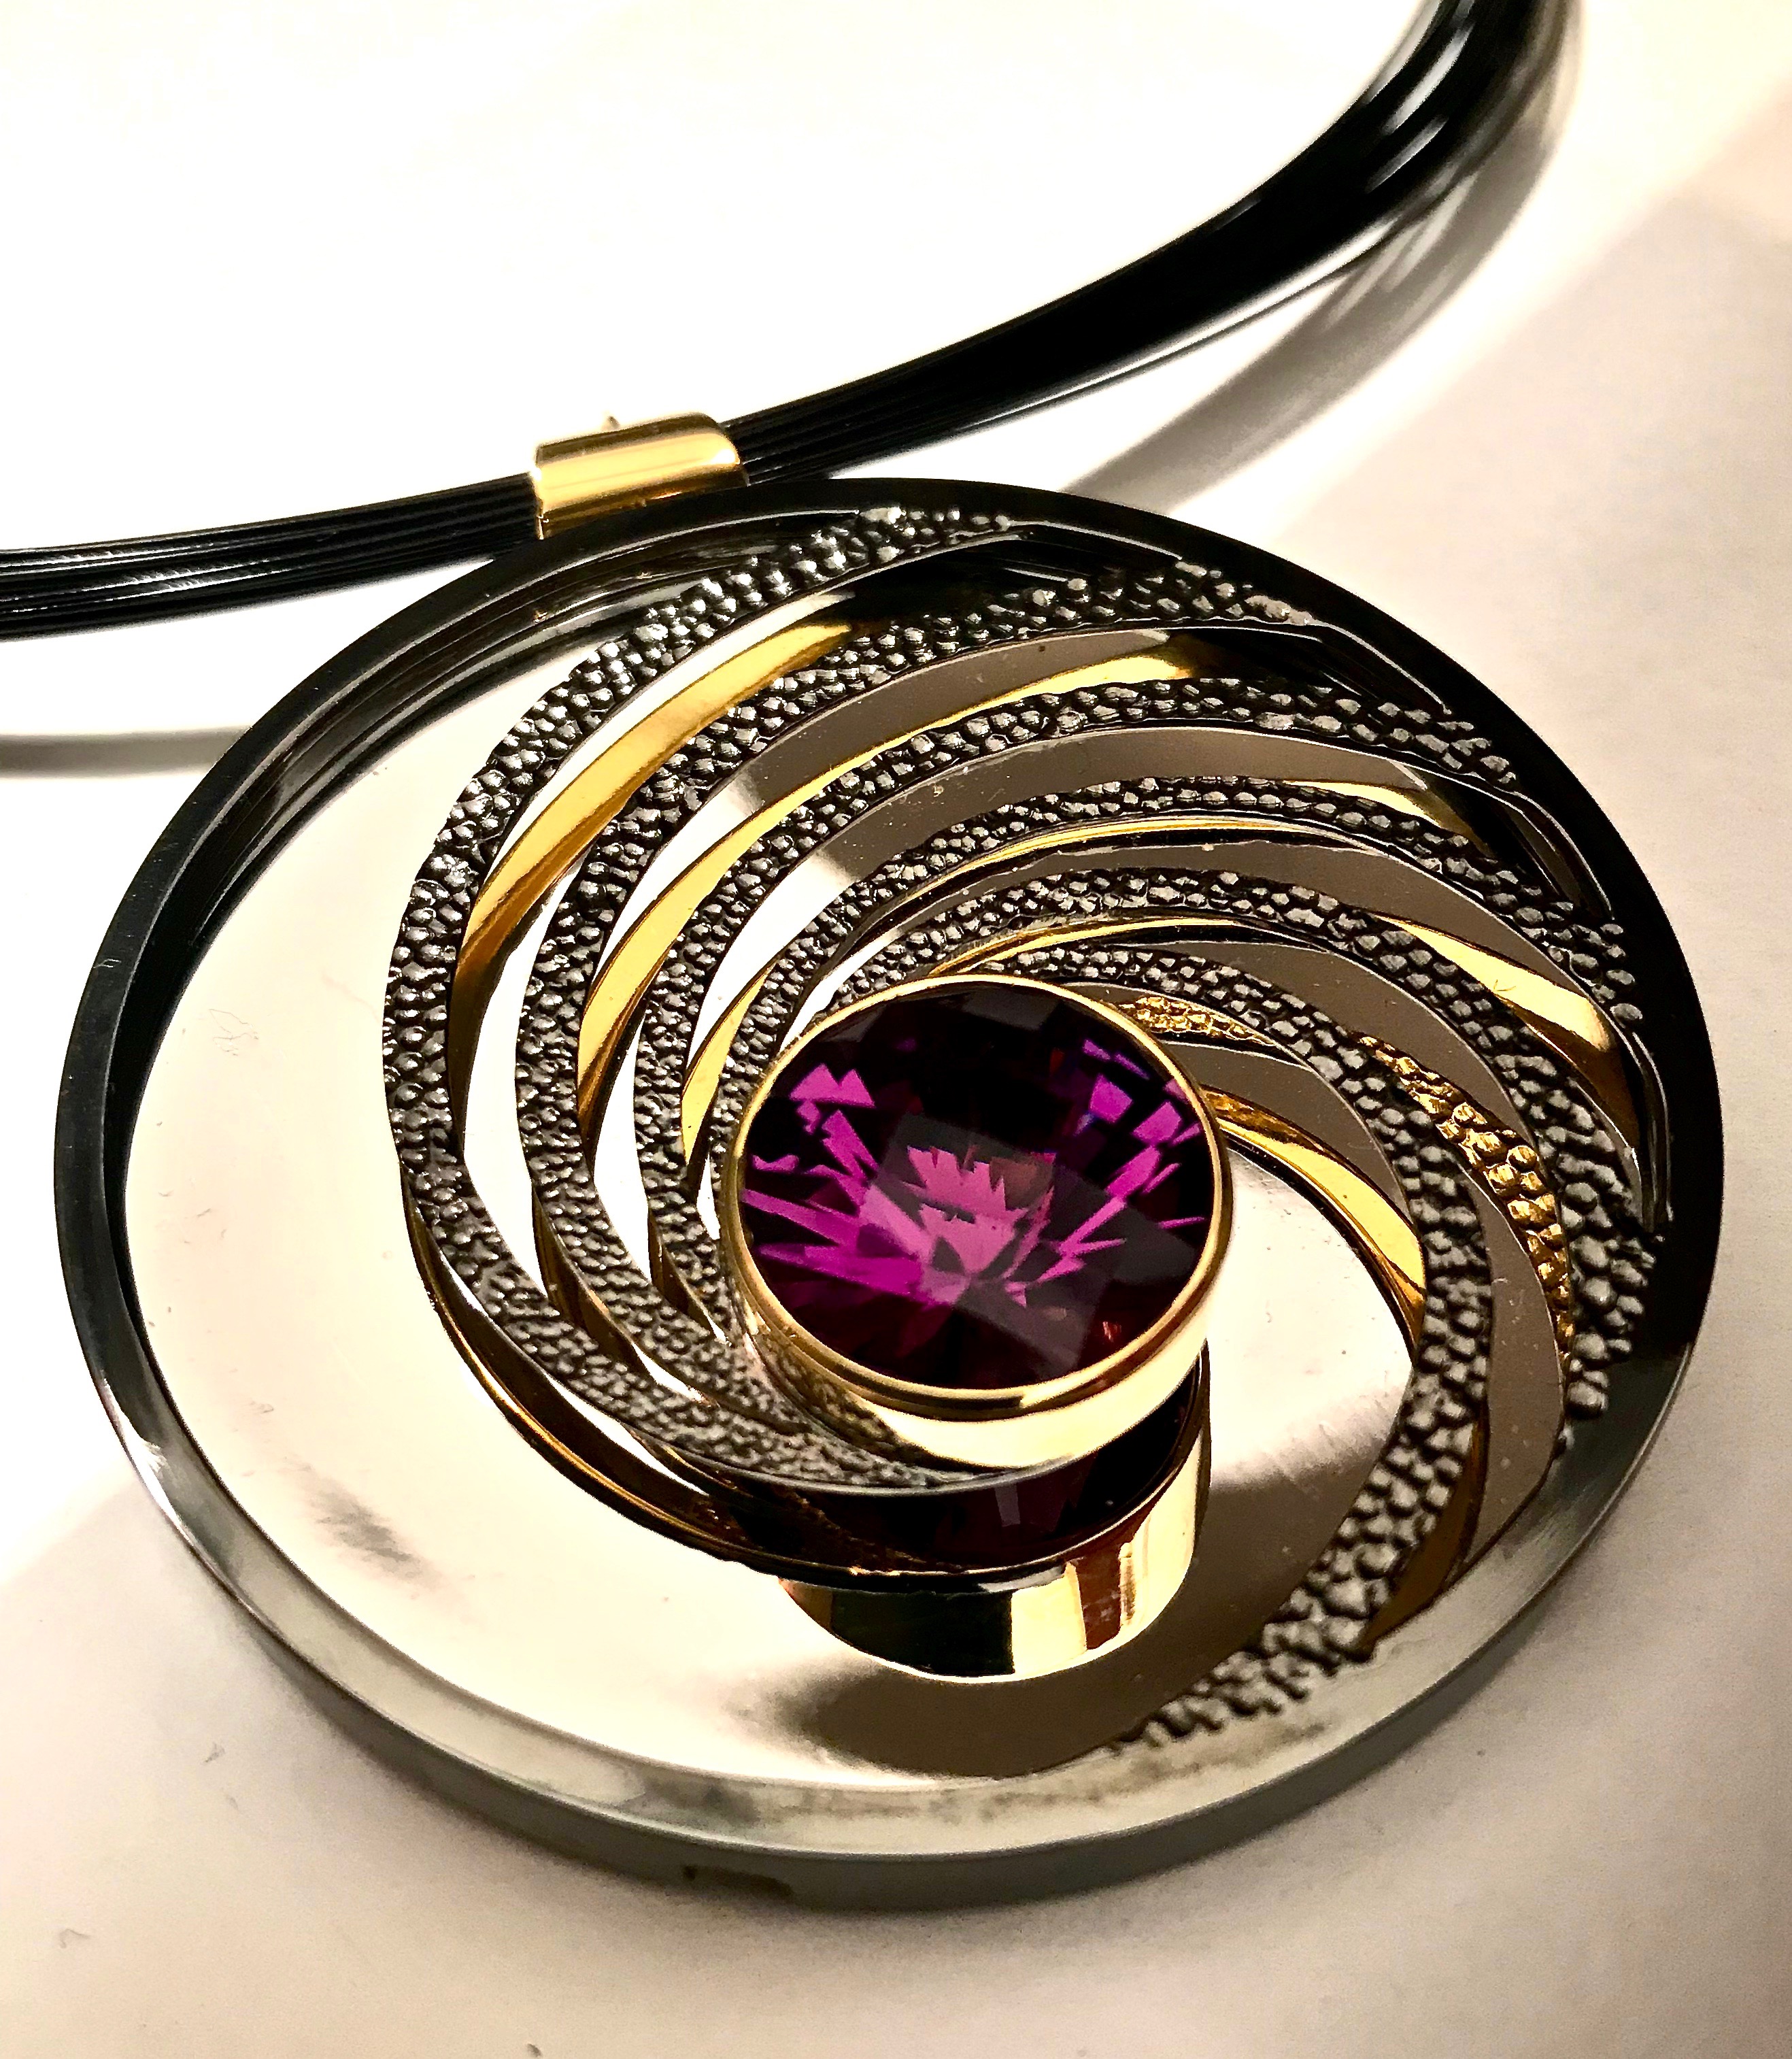 <a href="/node/298">Swinging on a Star. TDark Amethyst / Silver / Part Gilded part Rhodium Plate / the mirror on the inside back will reflect whatever its facing - here it’s the Sky.</a>